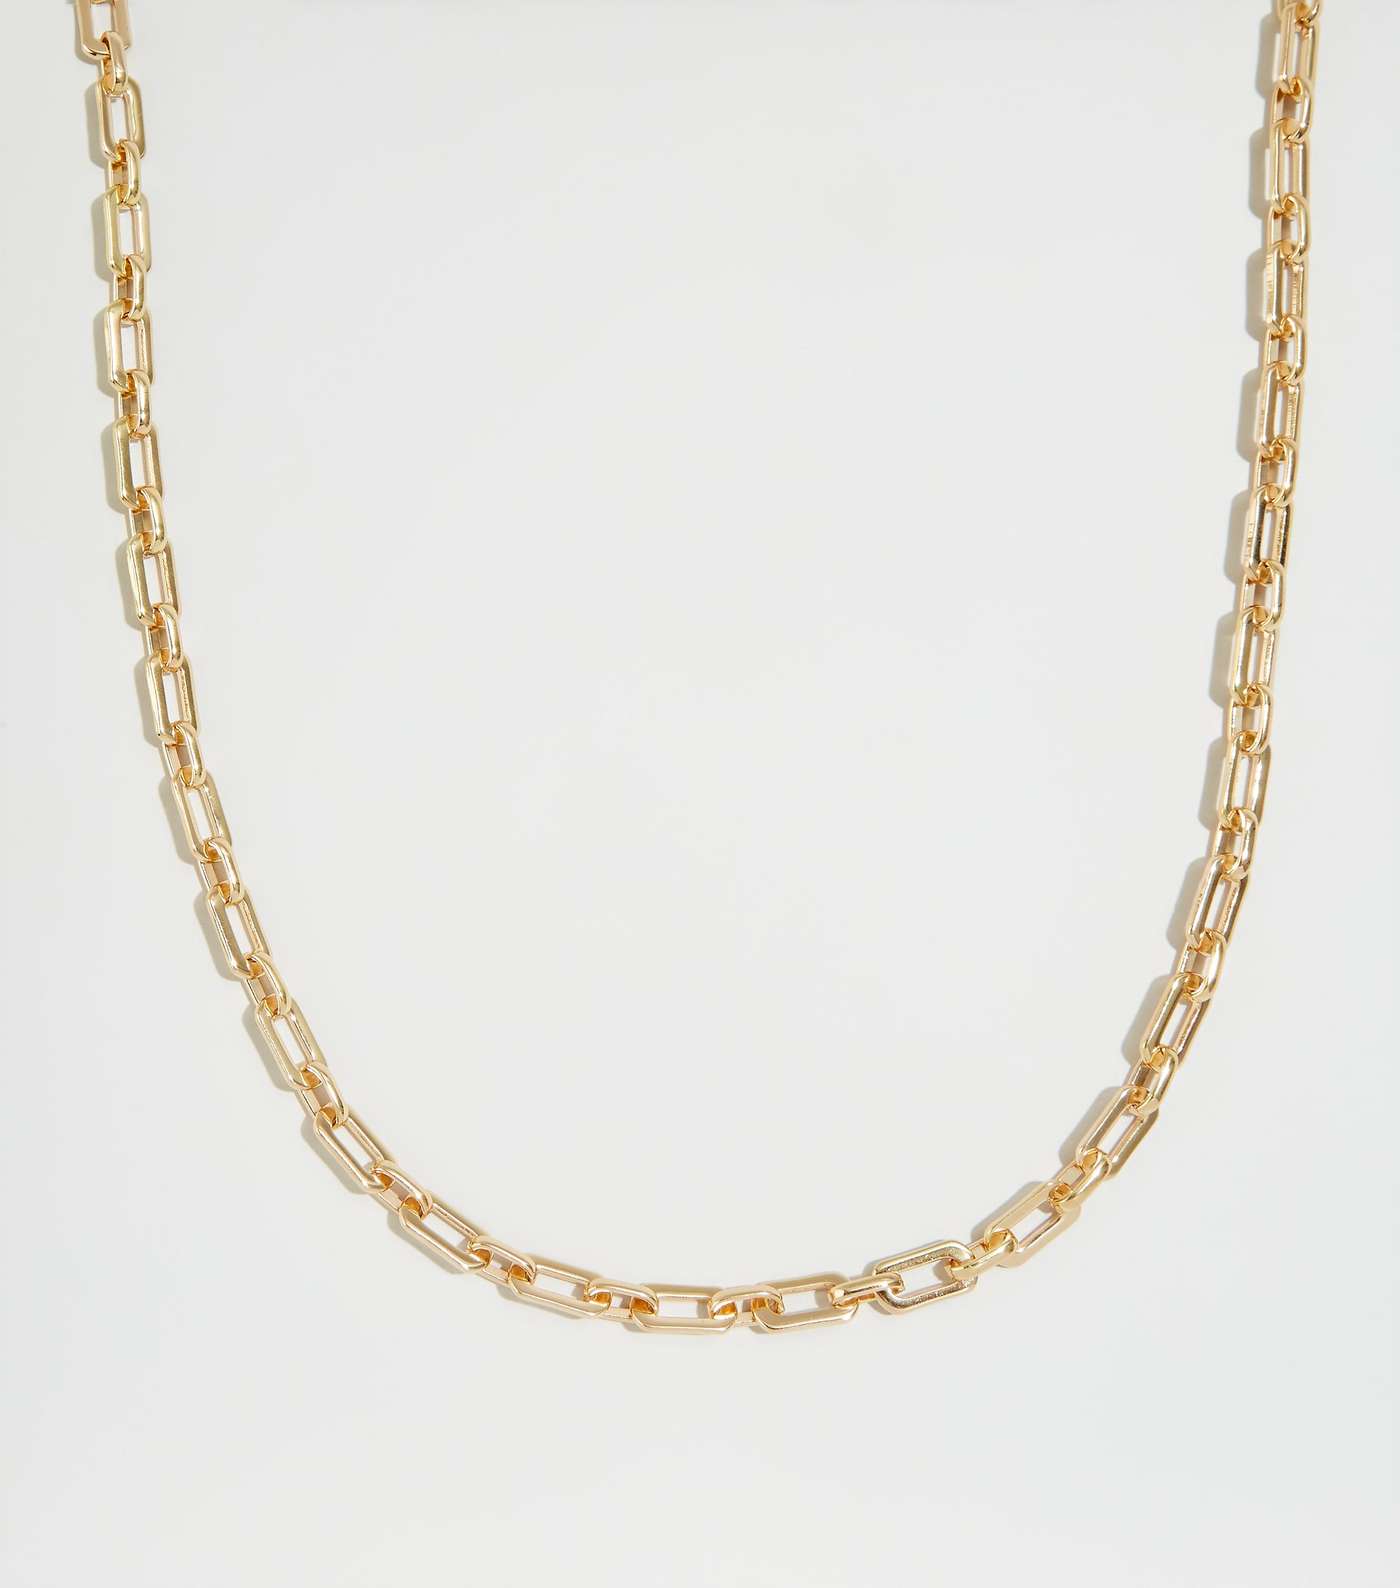 Gold Link Chain Necklace